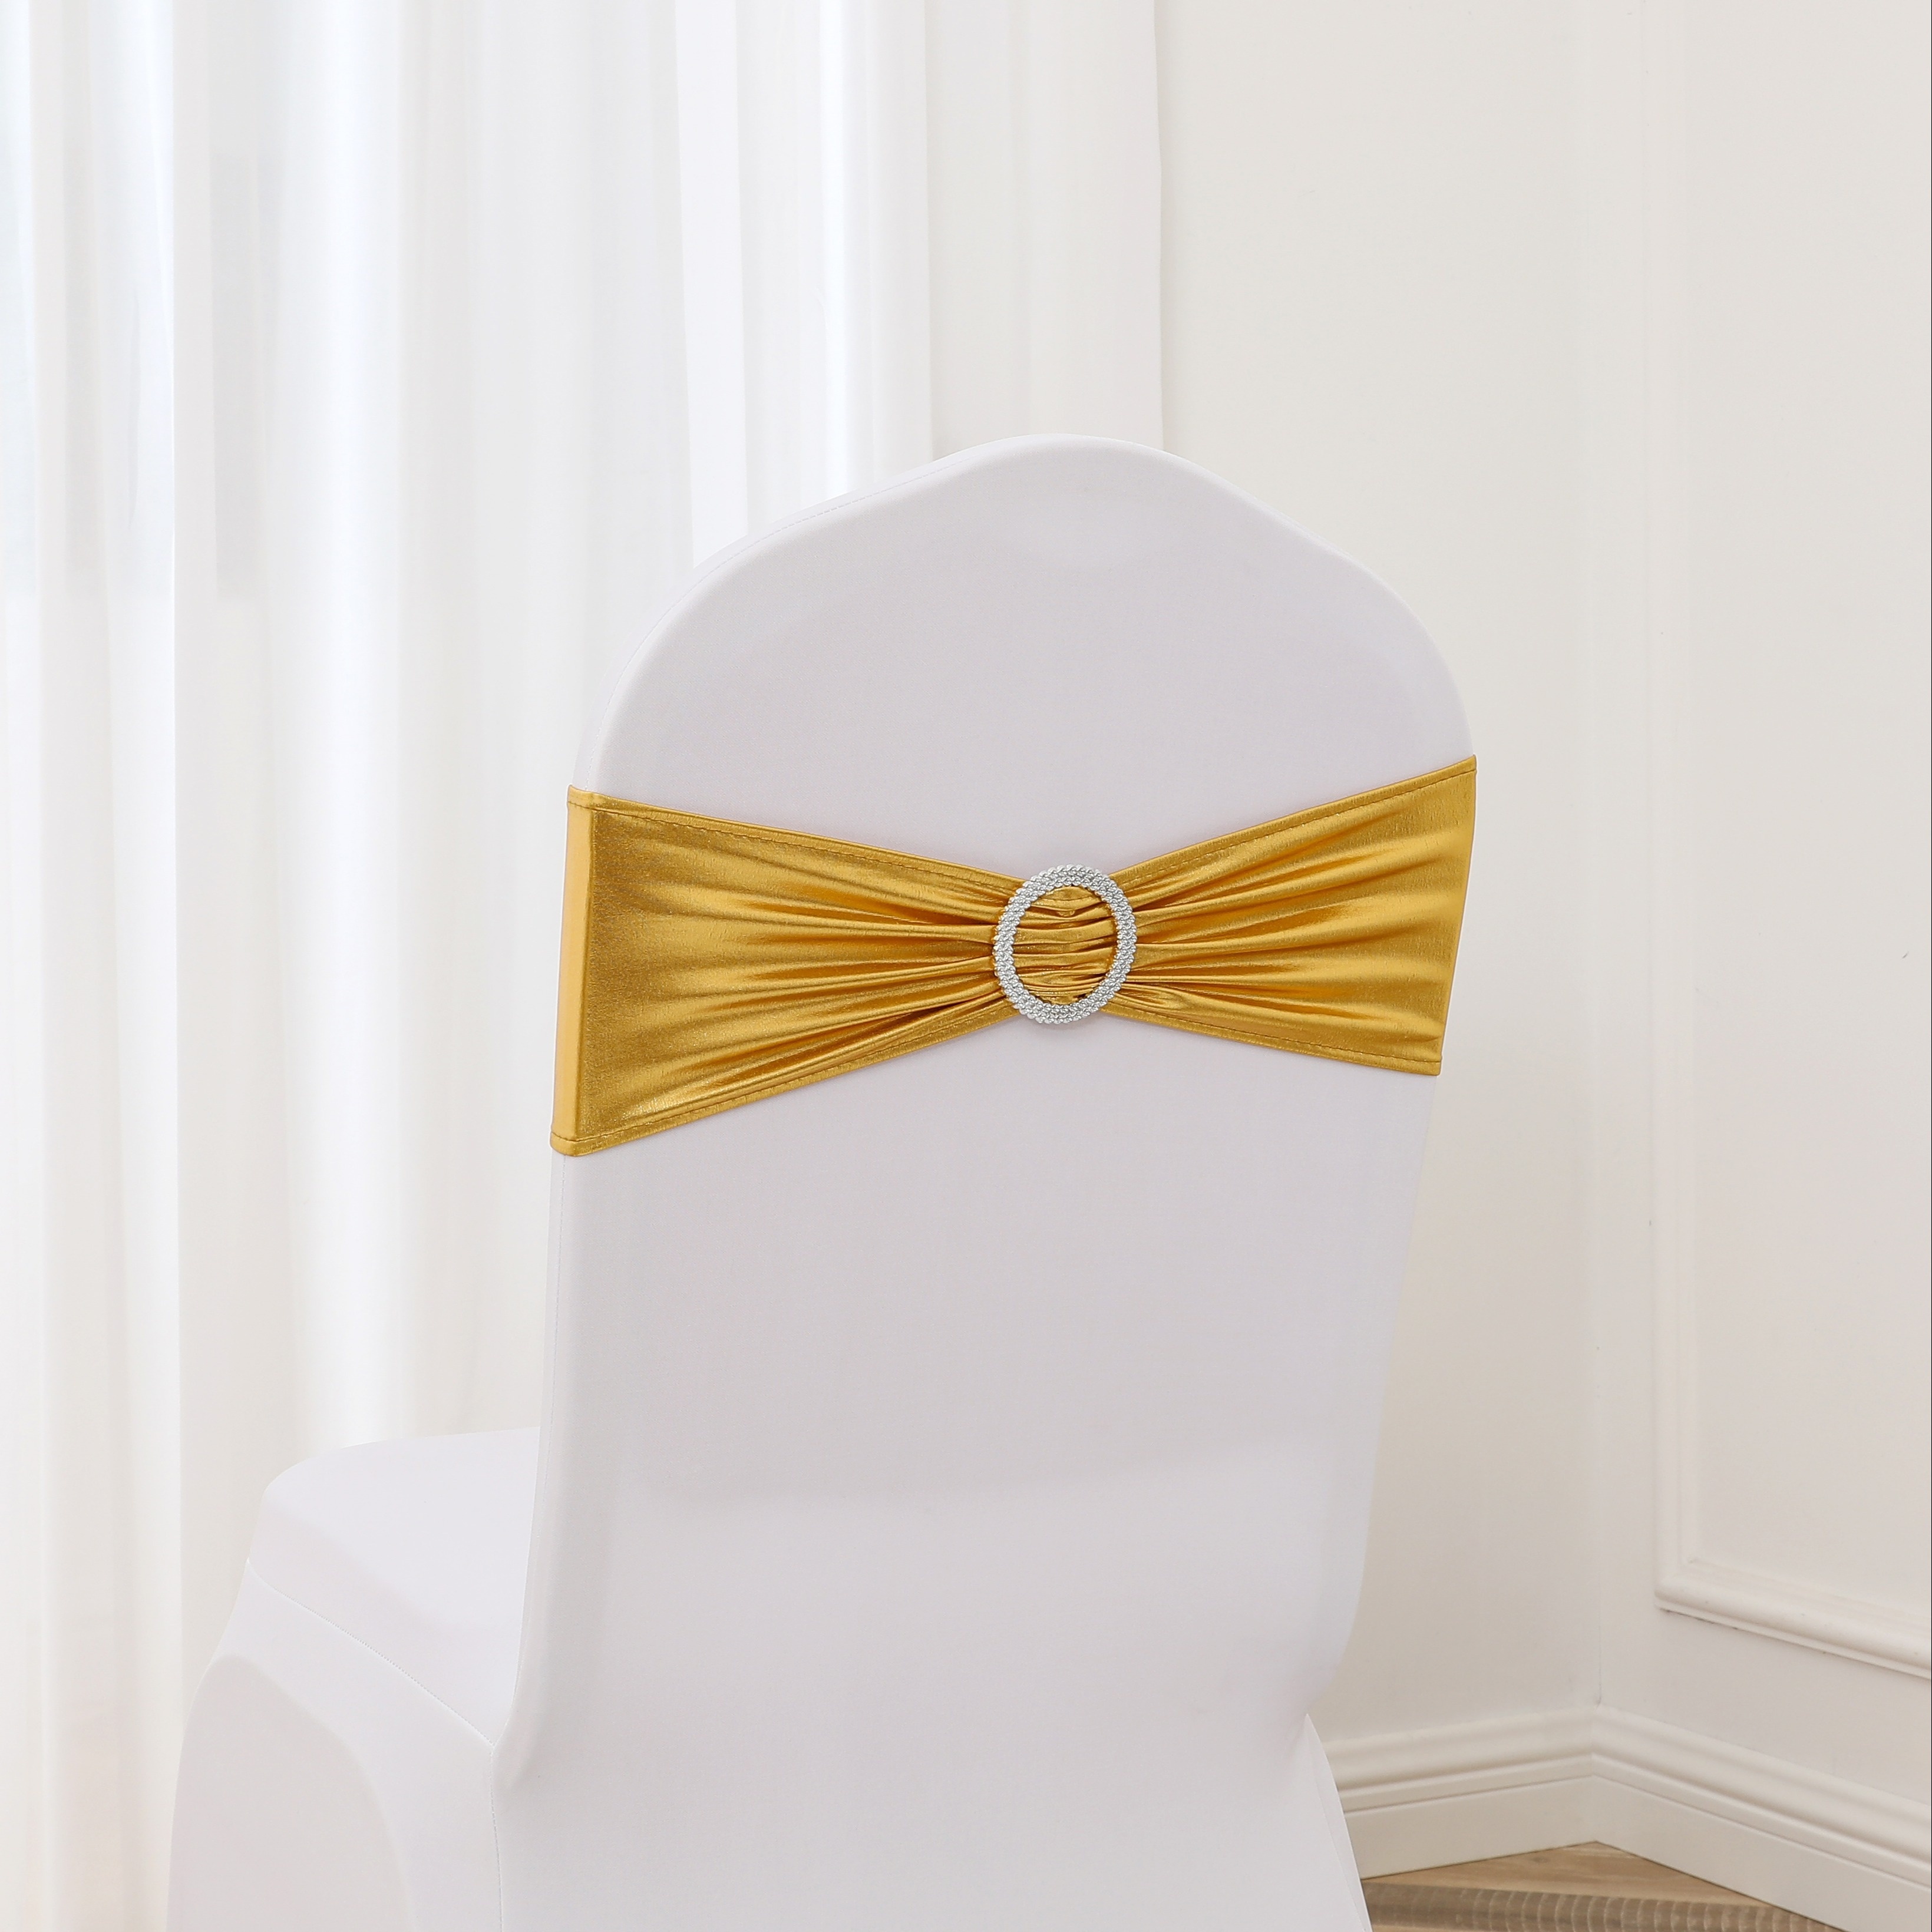 

20pcs Gold Spandex Chair Sashes With Rhinestone Buckle - Stretchable Polyester Chair Back Bows For Wedding, Party, Ceremony, Banquet Decoration - Machine Made Weave, General Fit